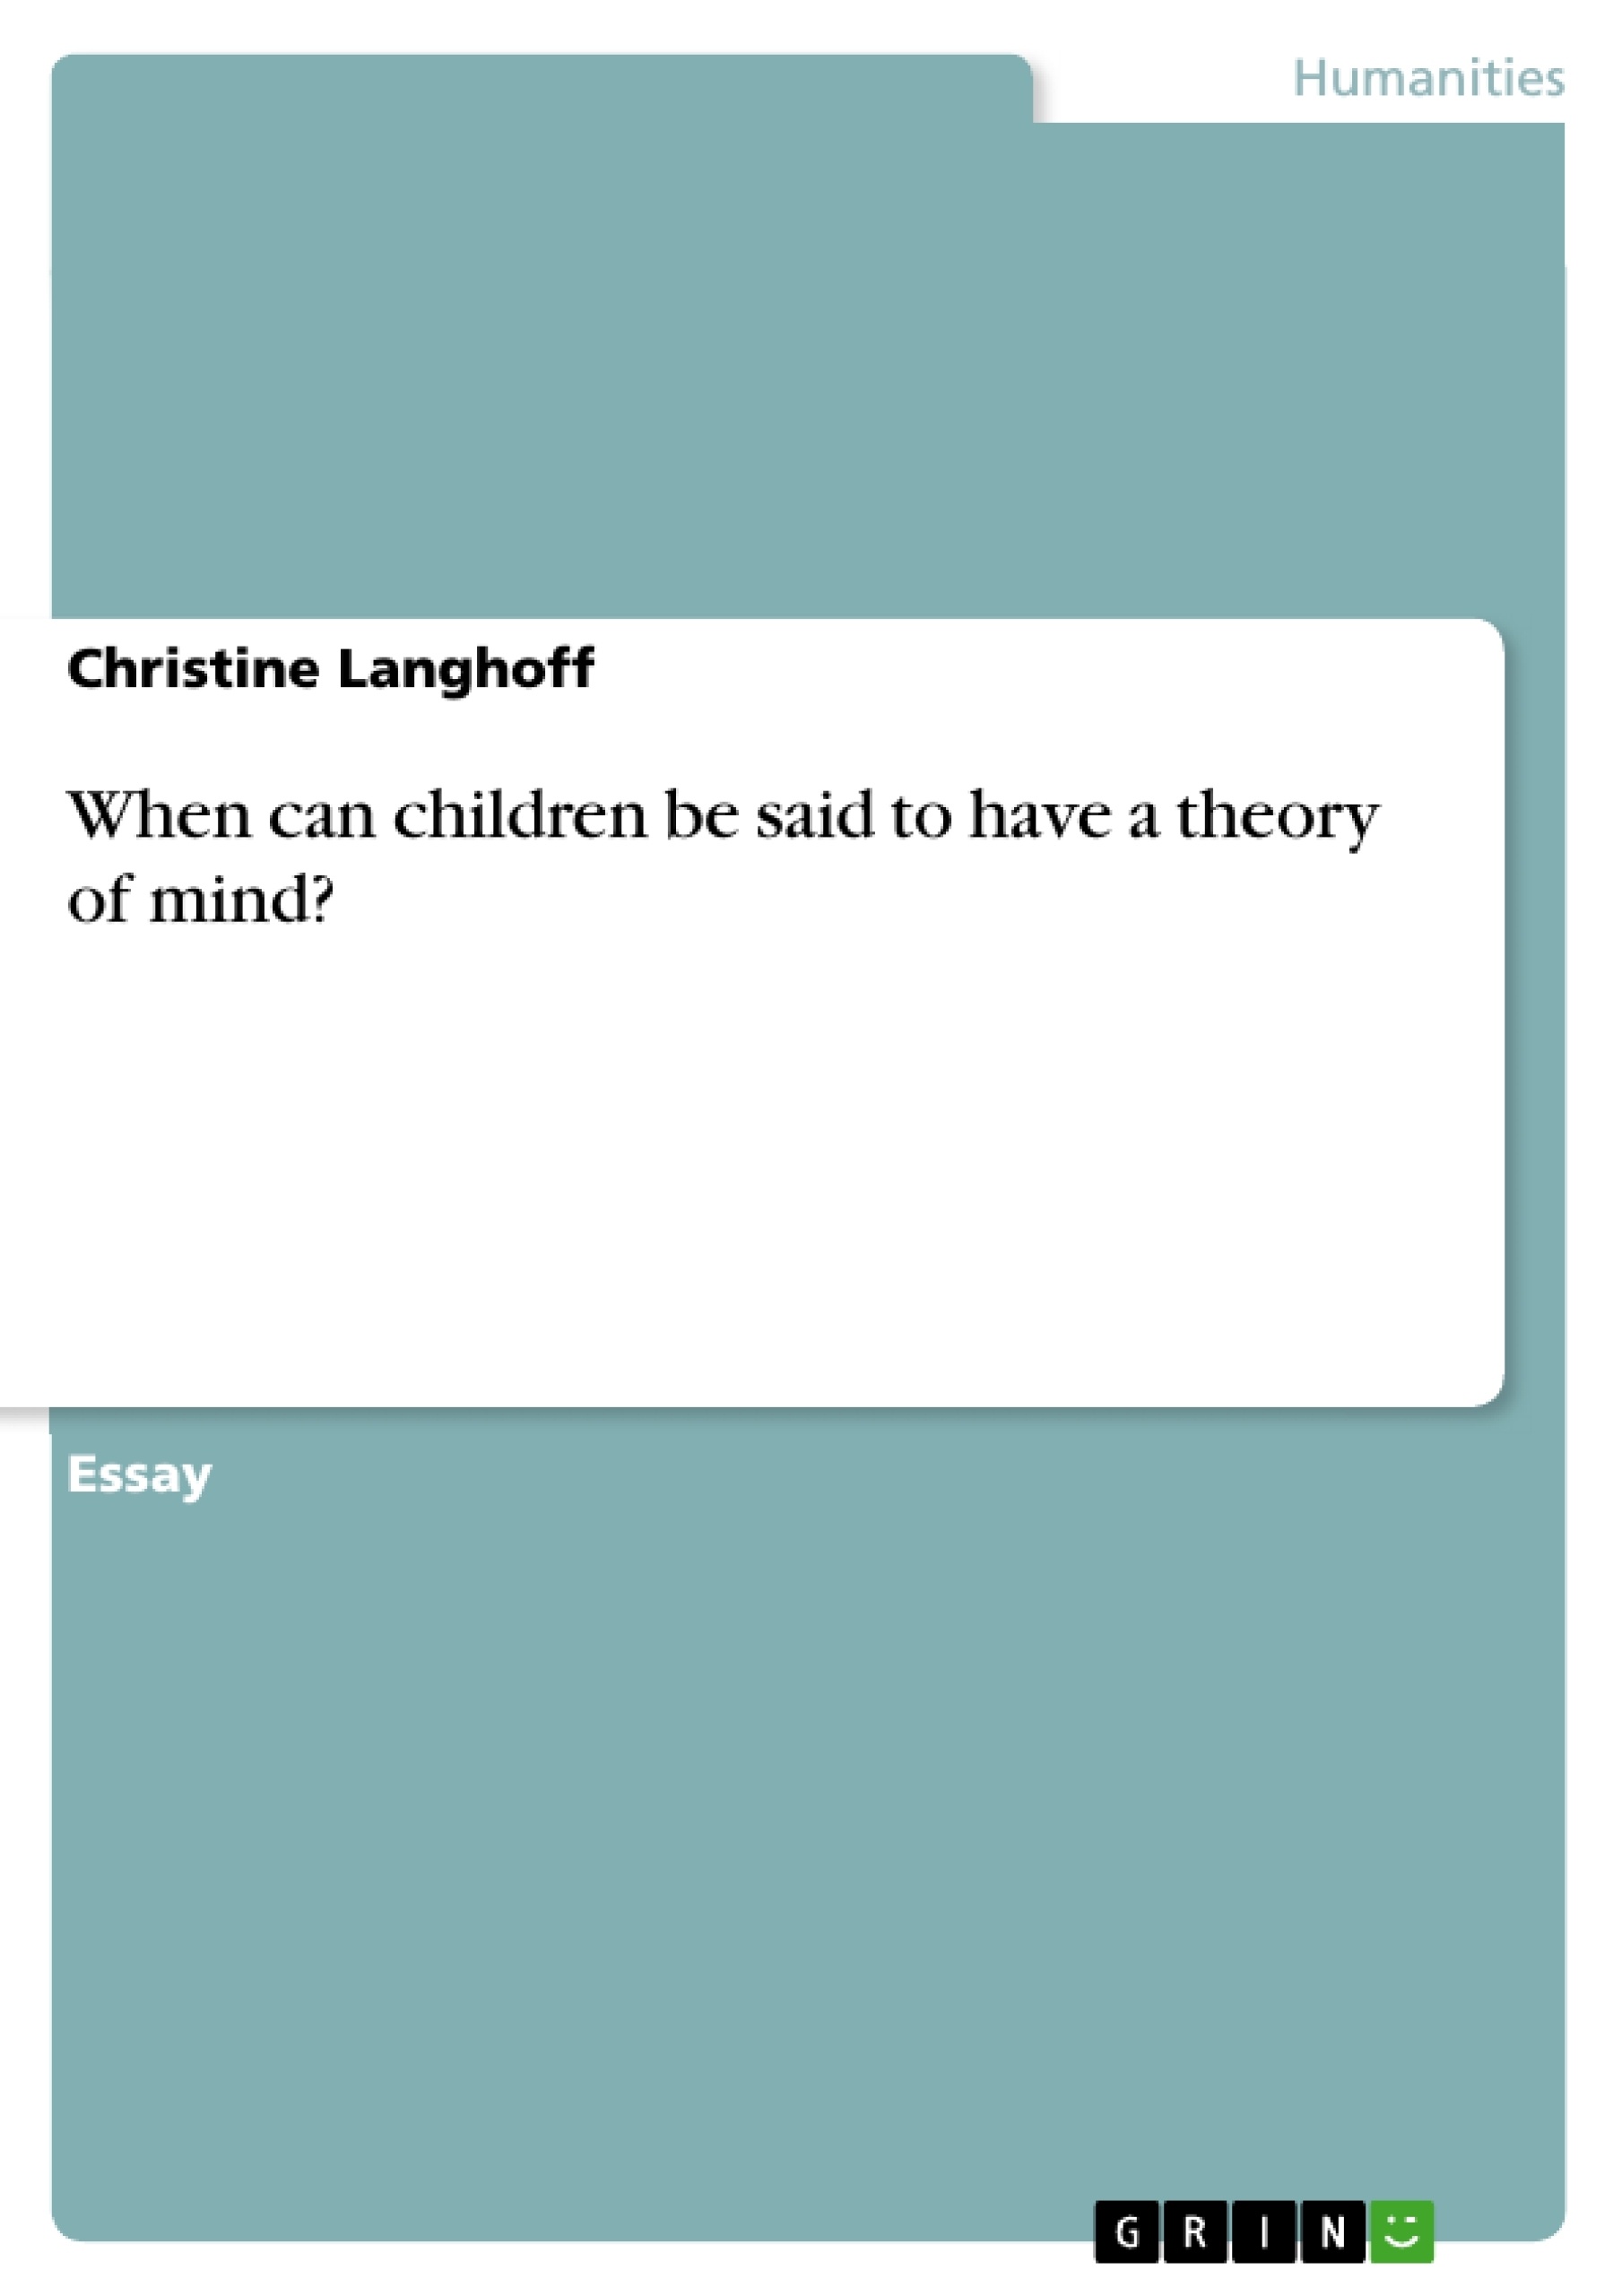 Título: When can children be said to have a theory of mind?